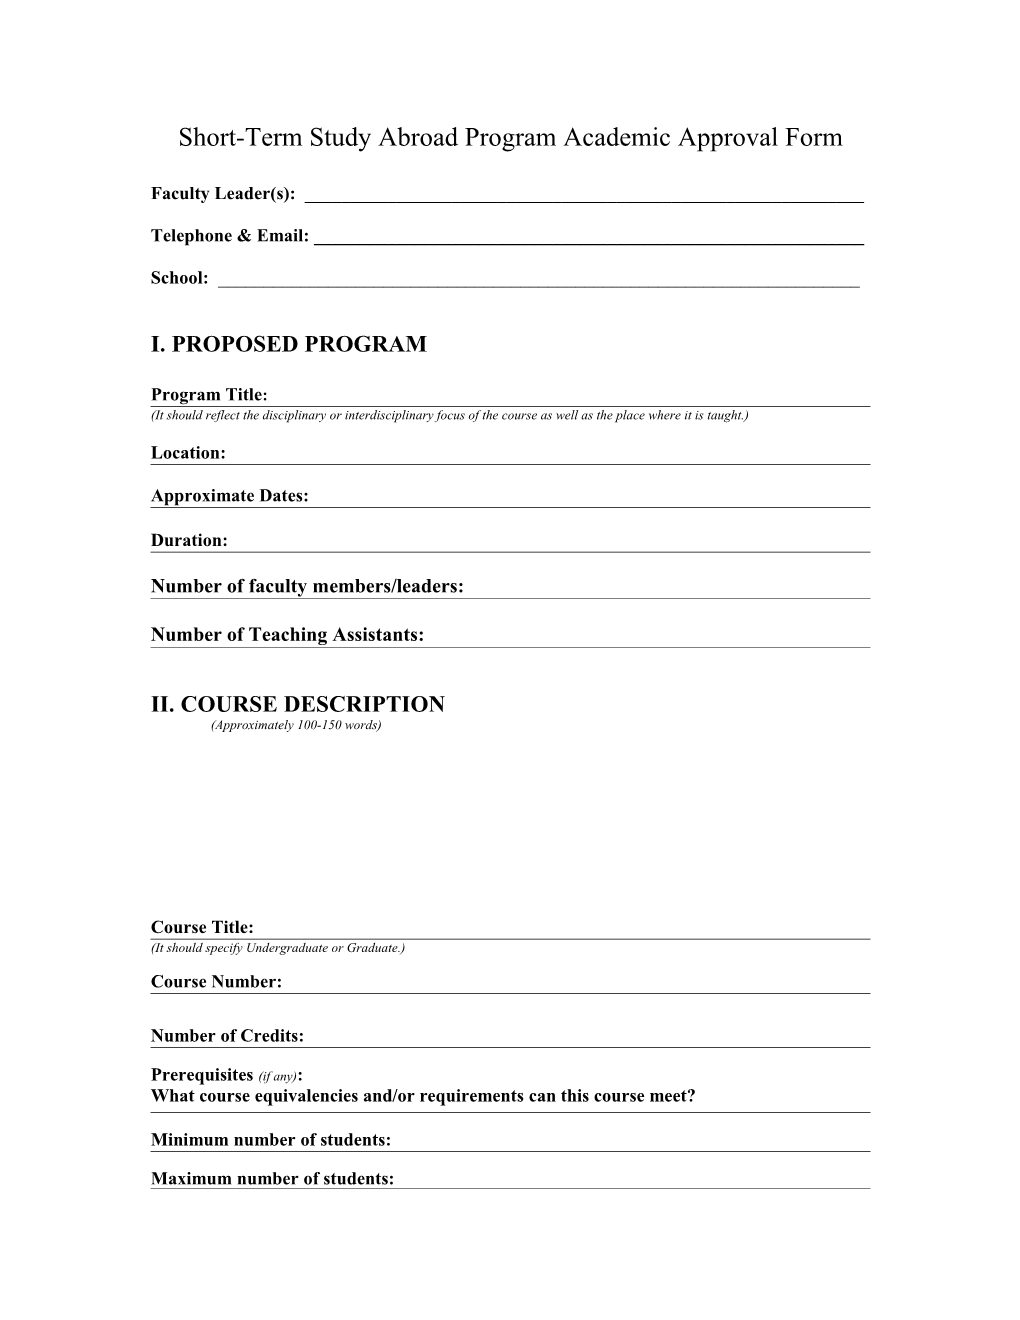 Short-Term Study Abroad Program Academic Approval Form